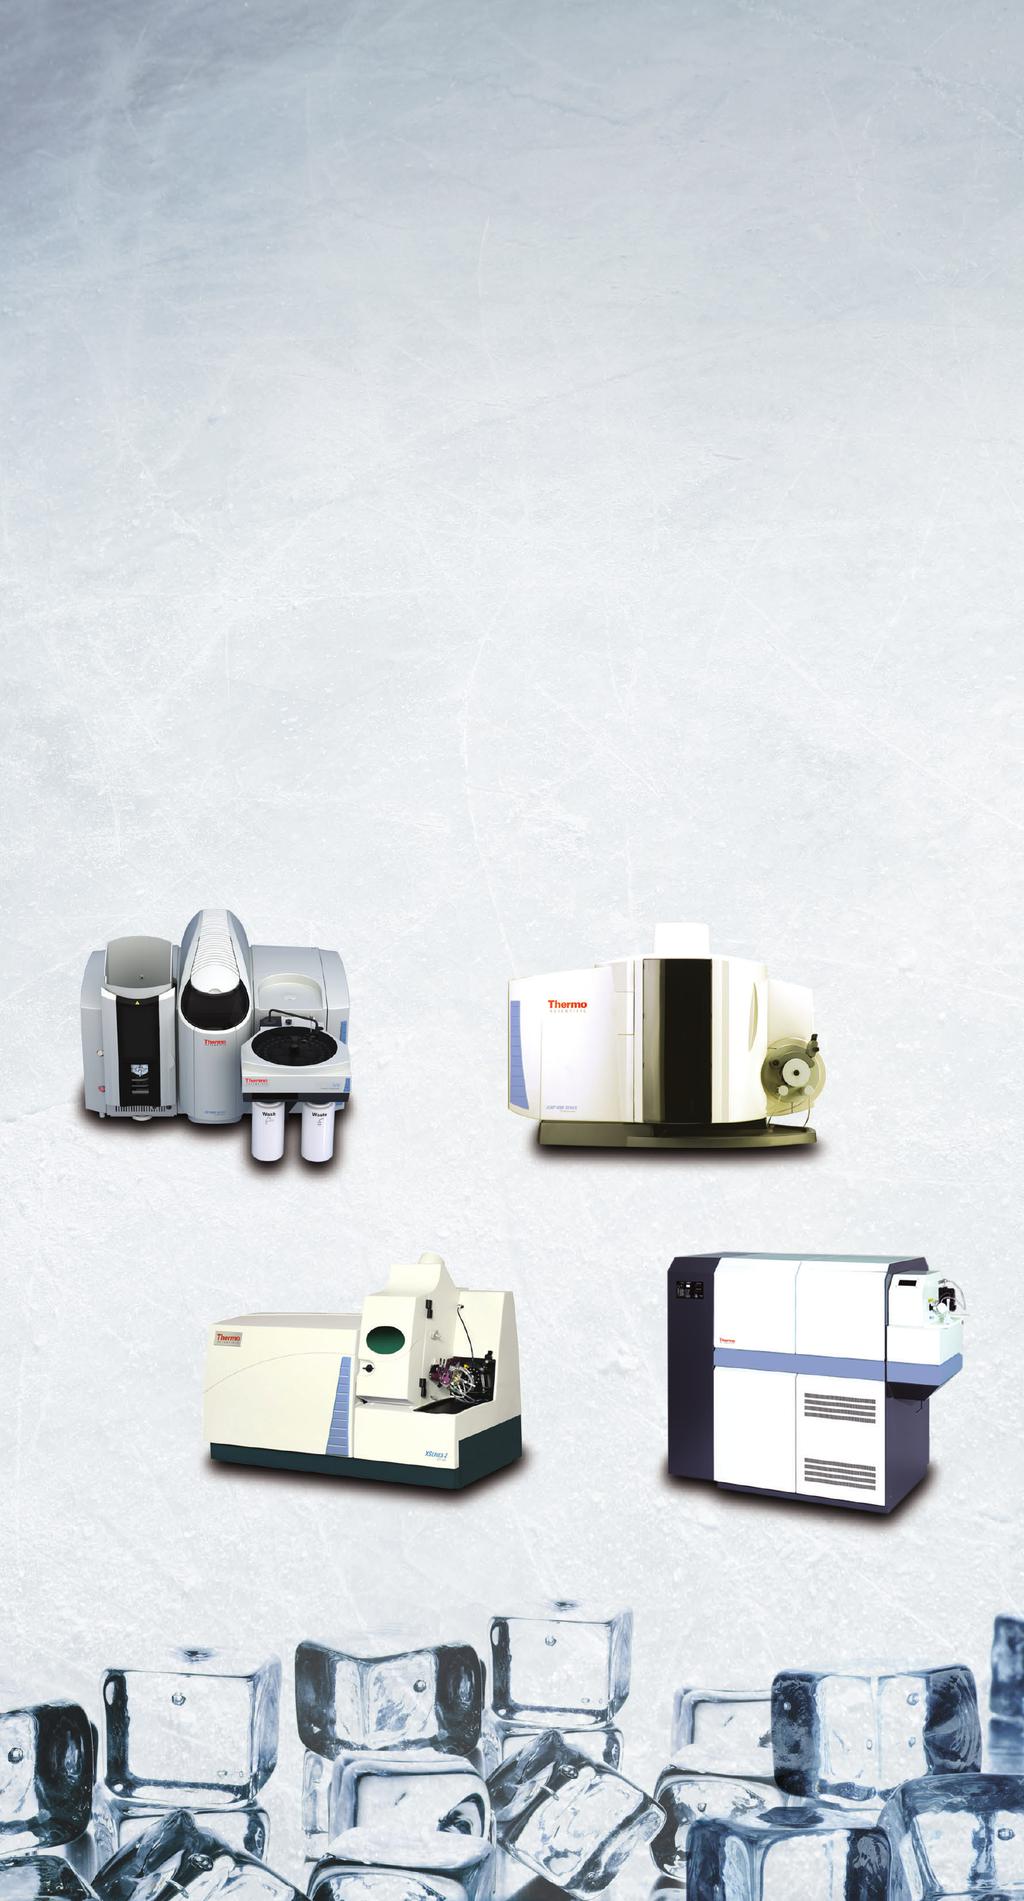 A refreshingly different Atomic Absorption The Thermo Scientific ice 3000 Series AAS is the clear and safe choice of instrument to complete your elemental analysis needs.